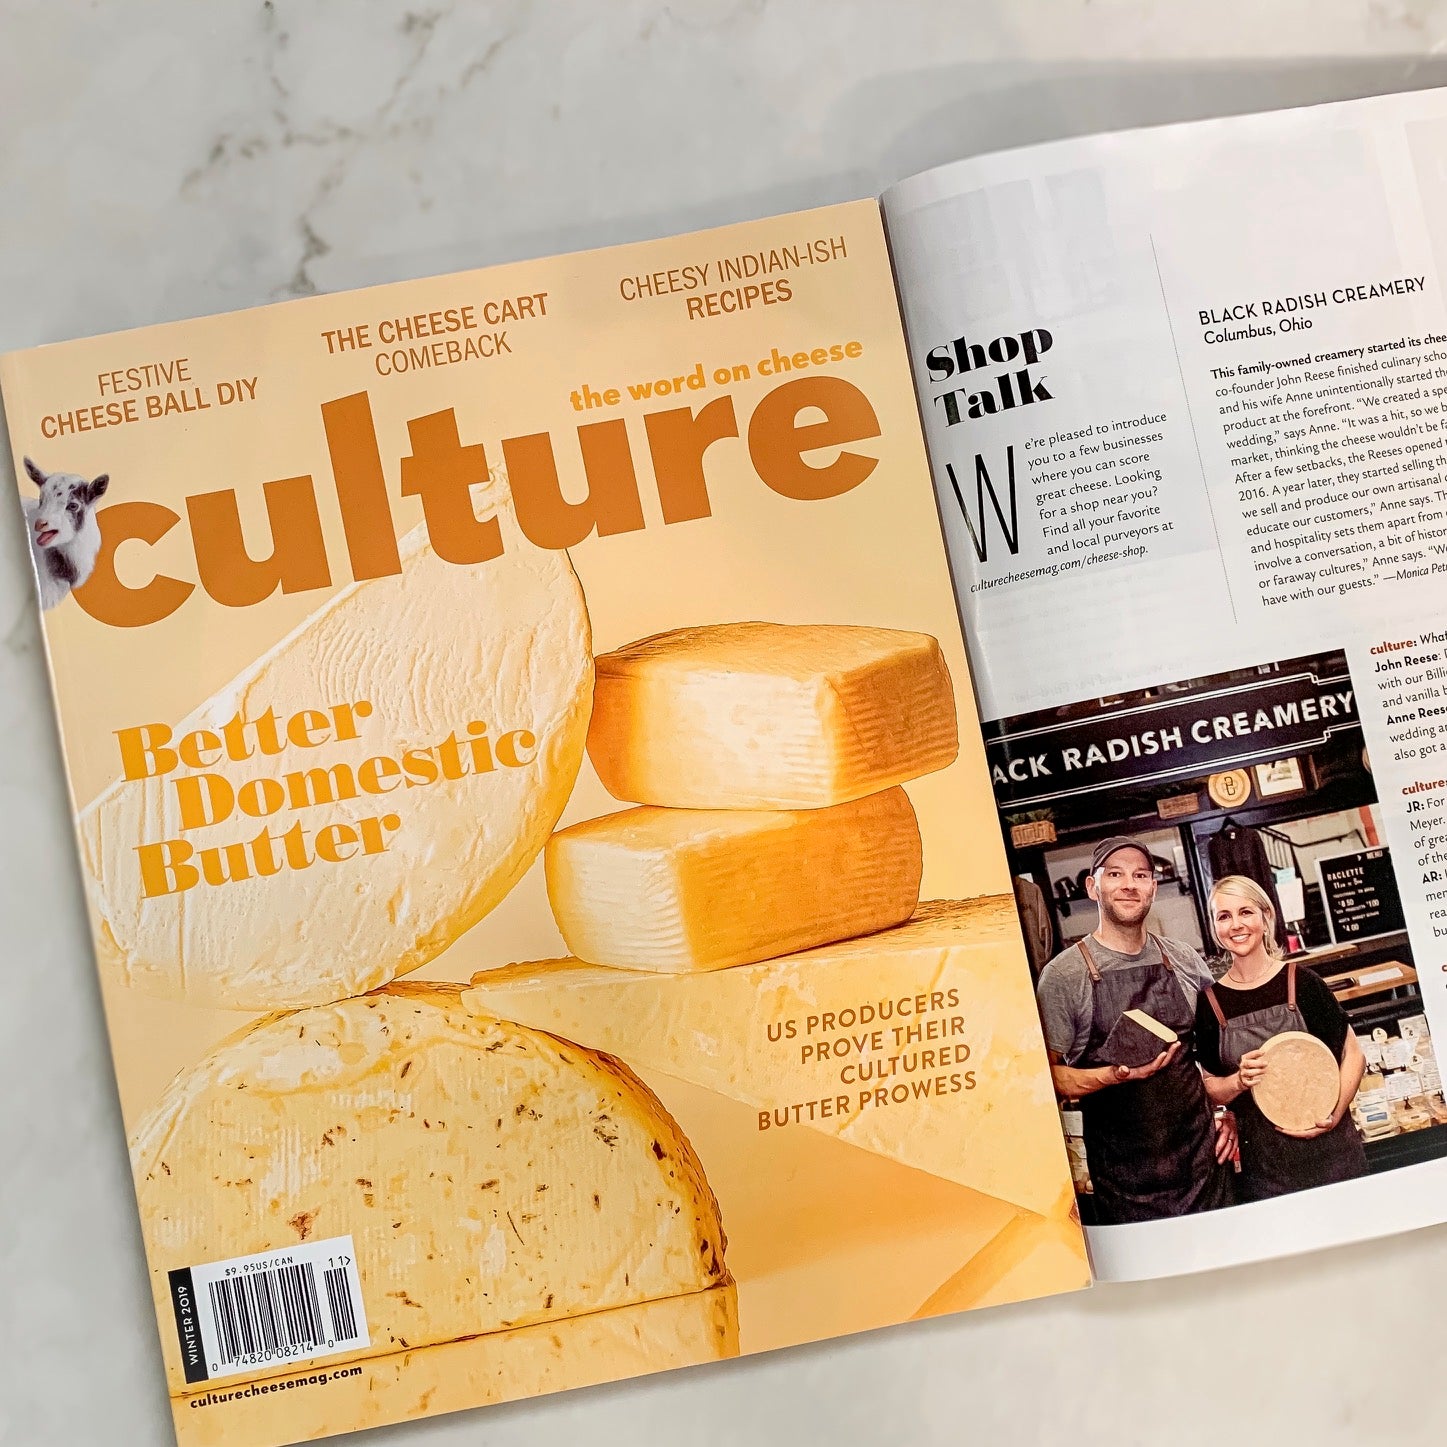 BRC Cheese Shop Featured in Culture Magazine!